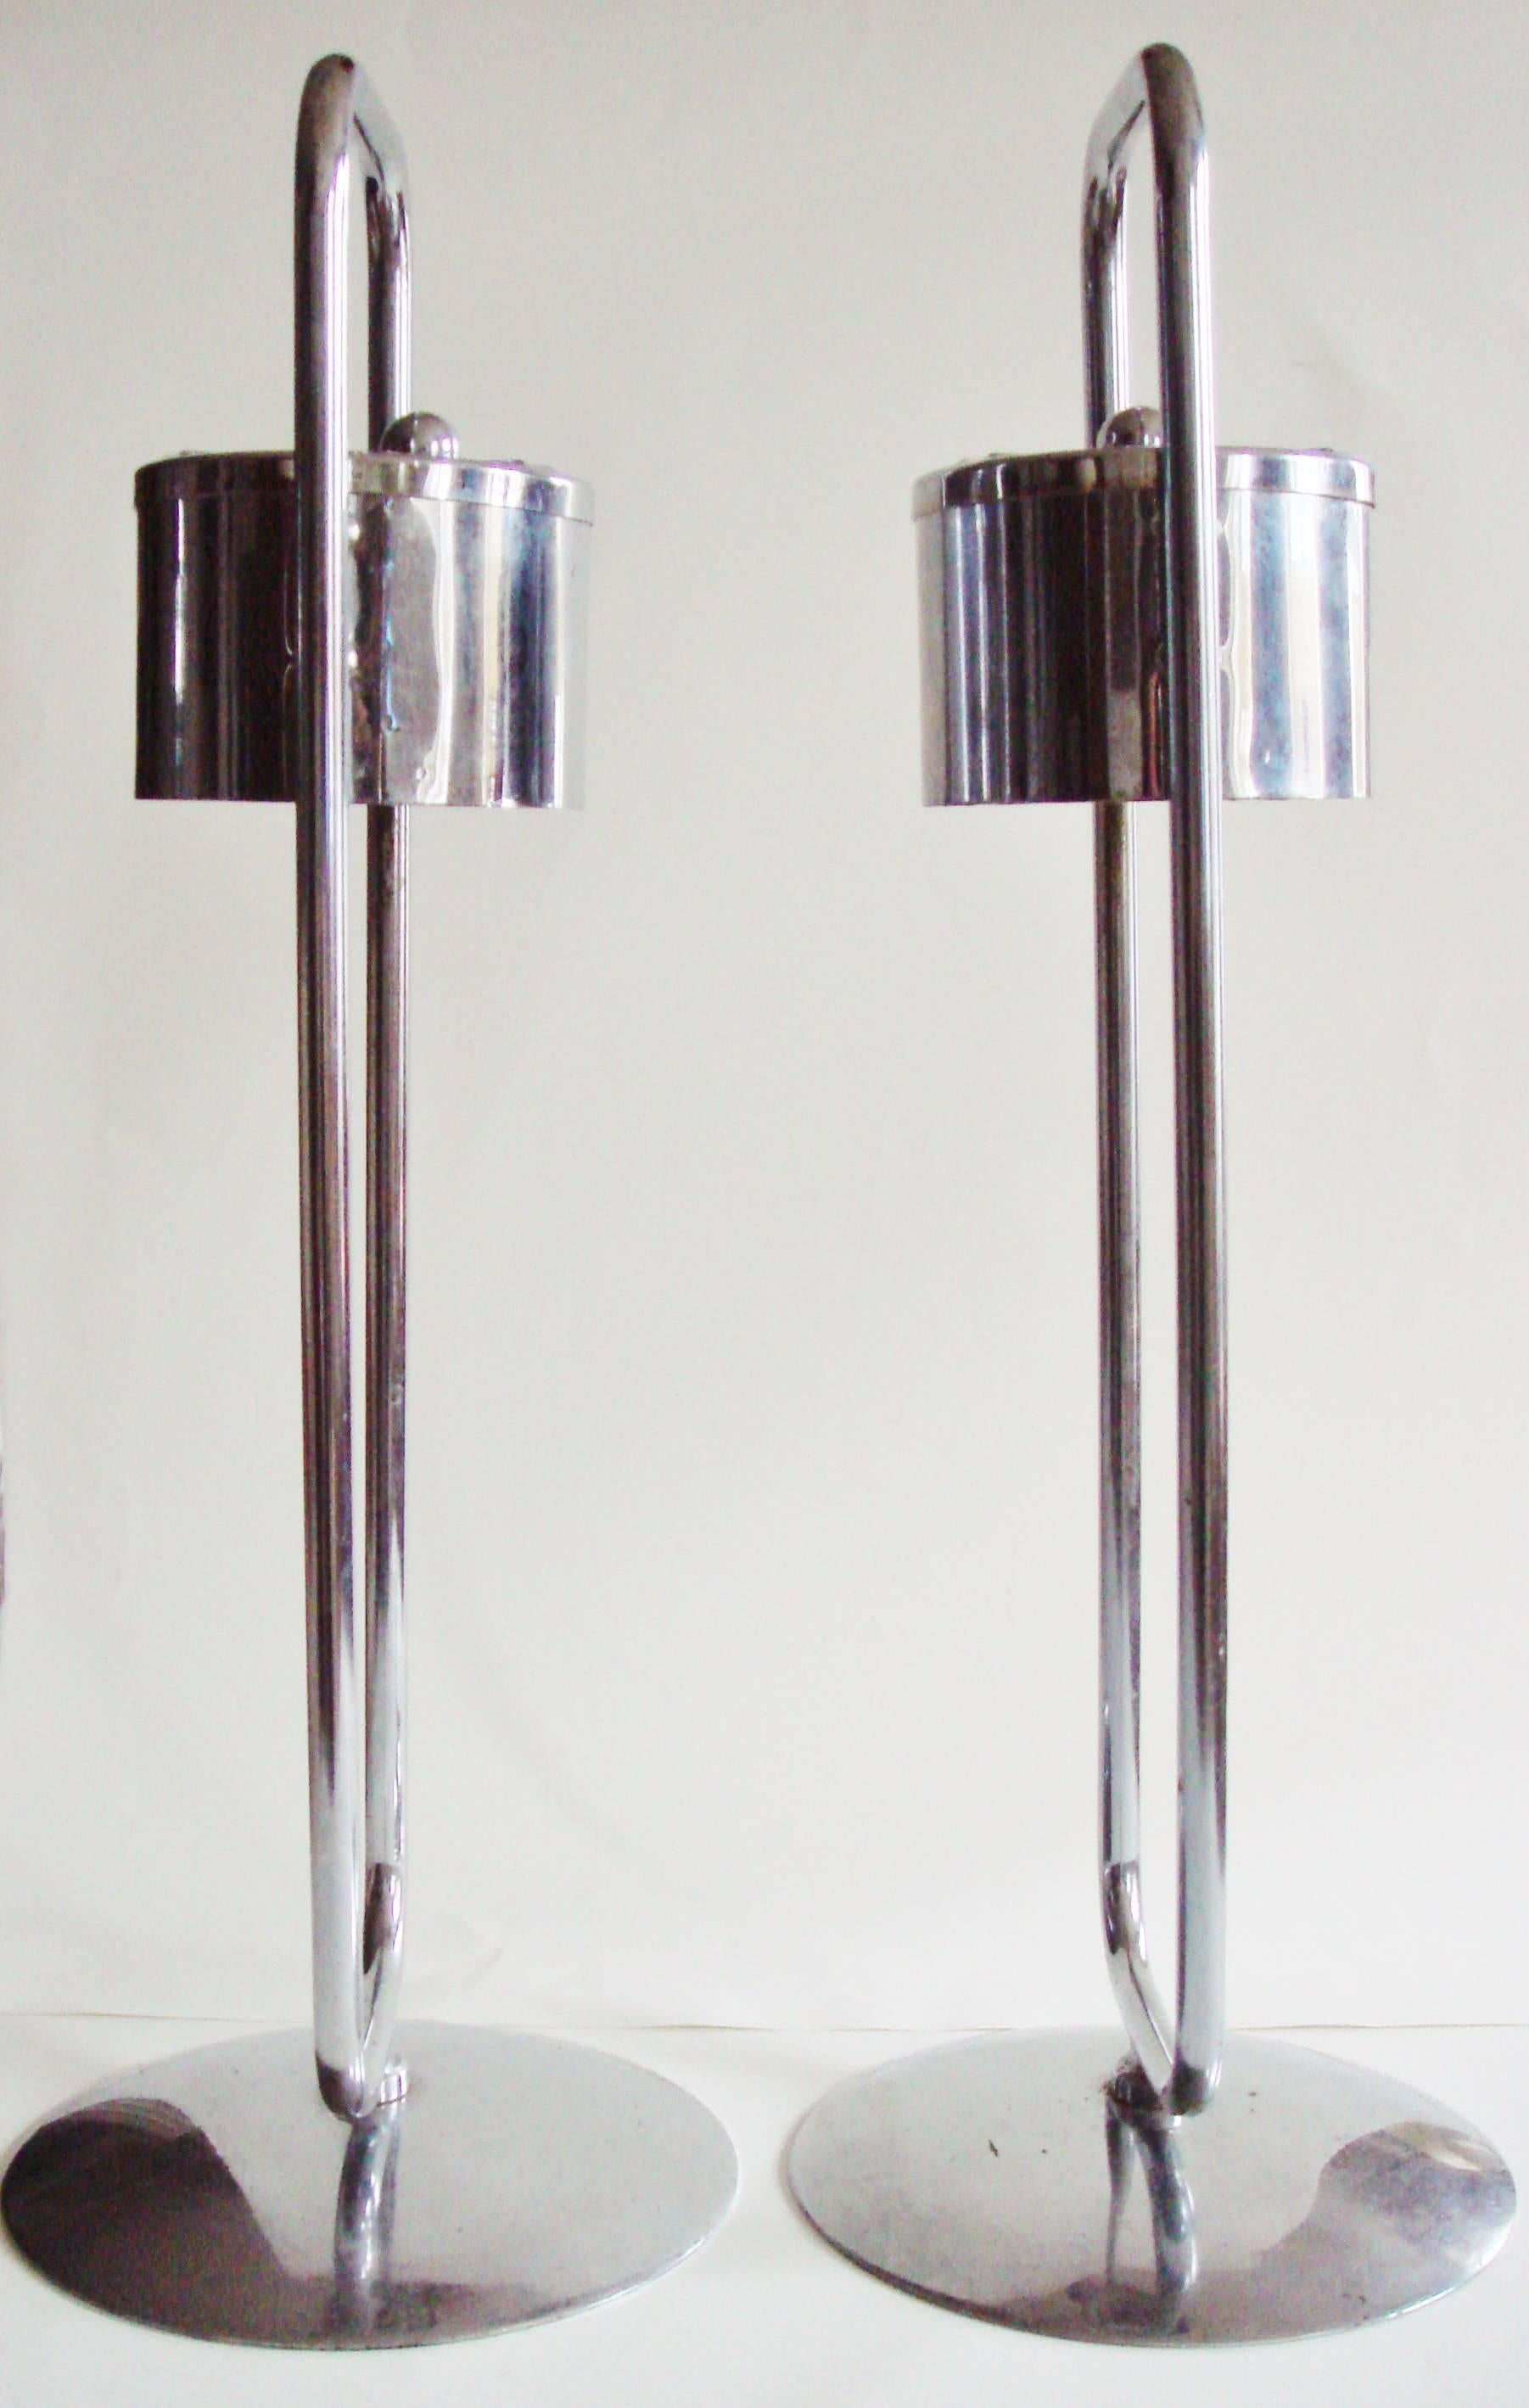 This stylishly designed pair of American Art Deco floor standing ashtrays were produced for use primarily in commercial spaces such as theatre/hotel lobbies and barbershops. They were manufactured in the 1940s by Royalchrome, a product line of the